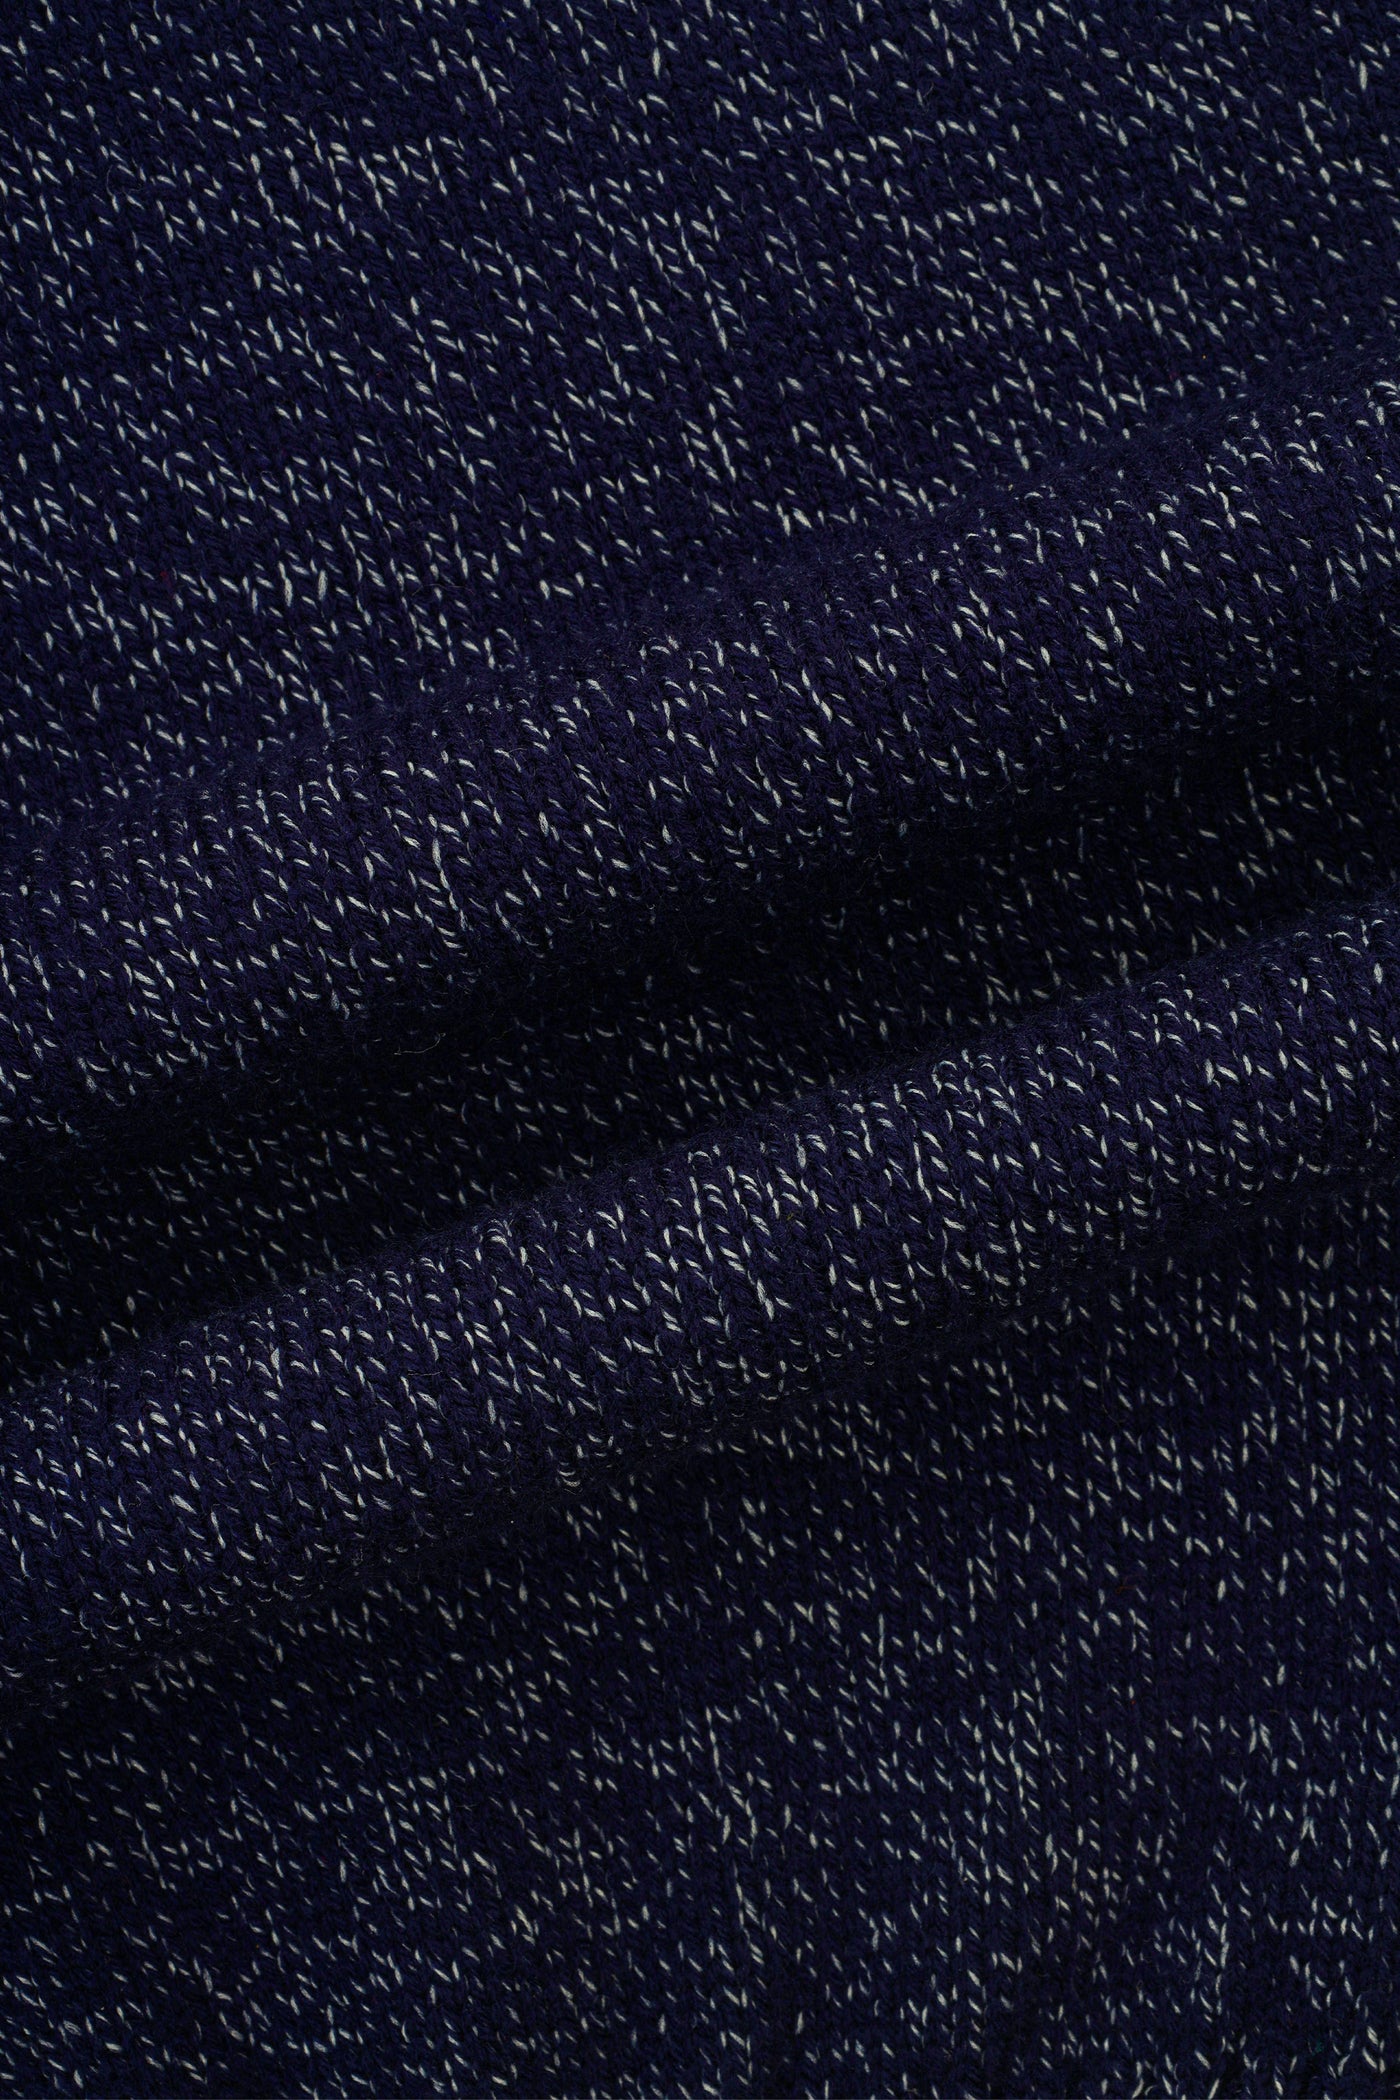 Jacquard Knitted Heavy Midnight Blue High-neck  Pullover